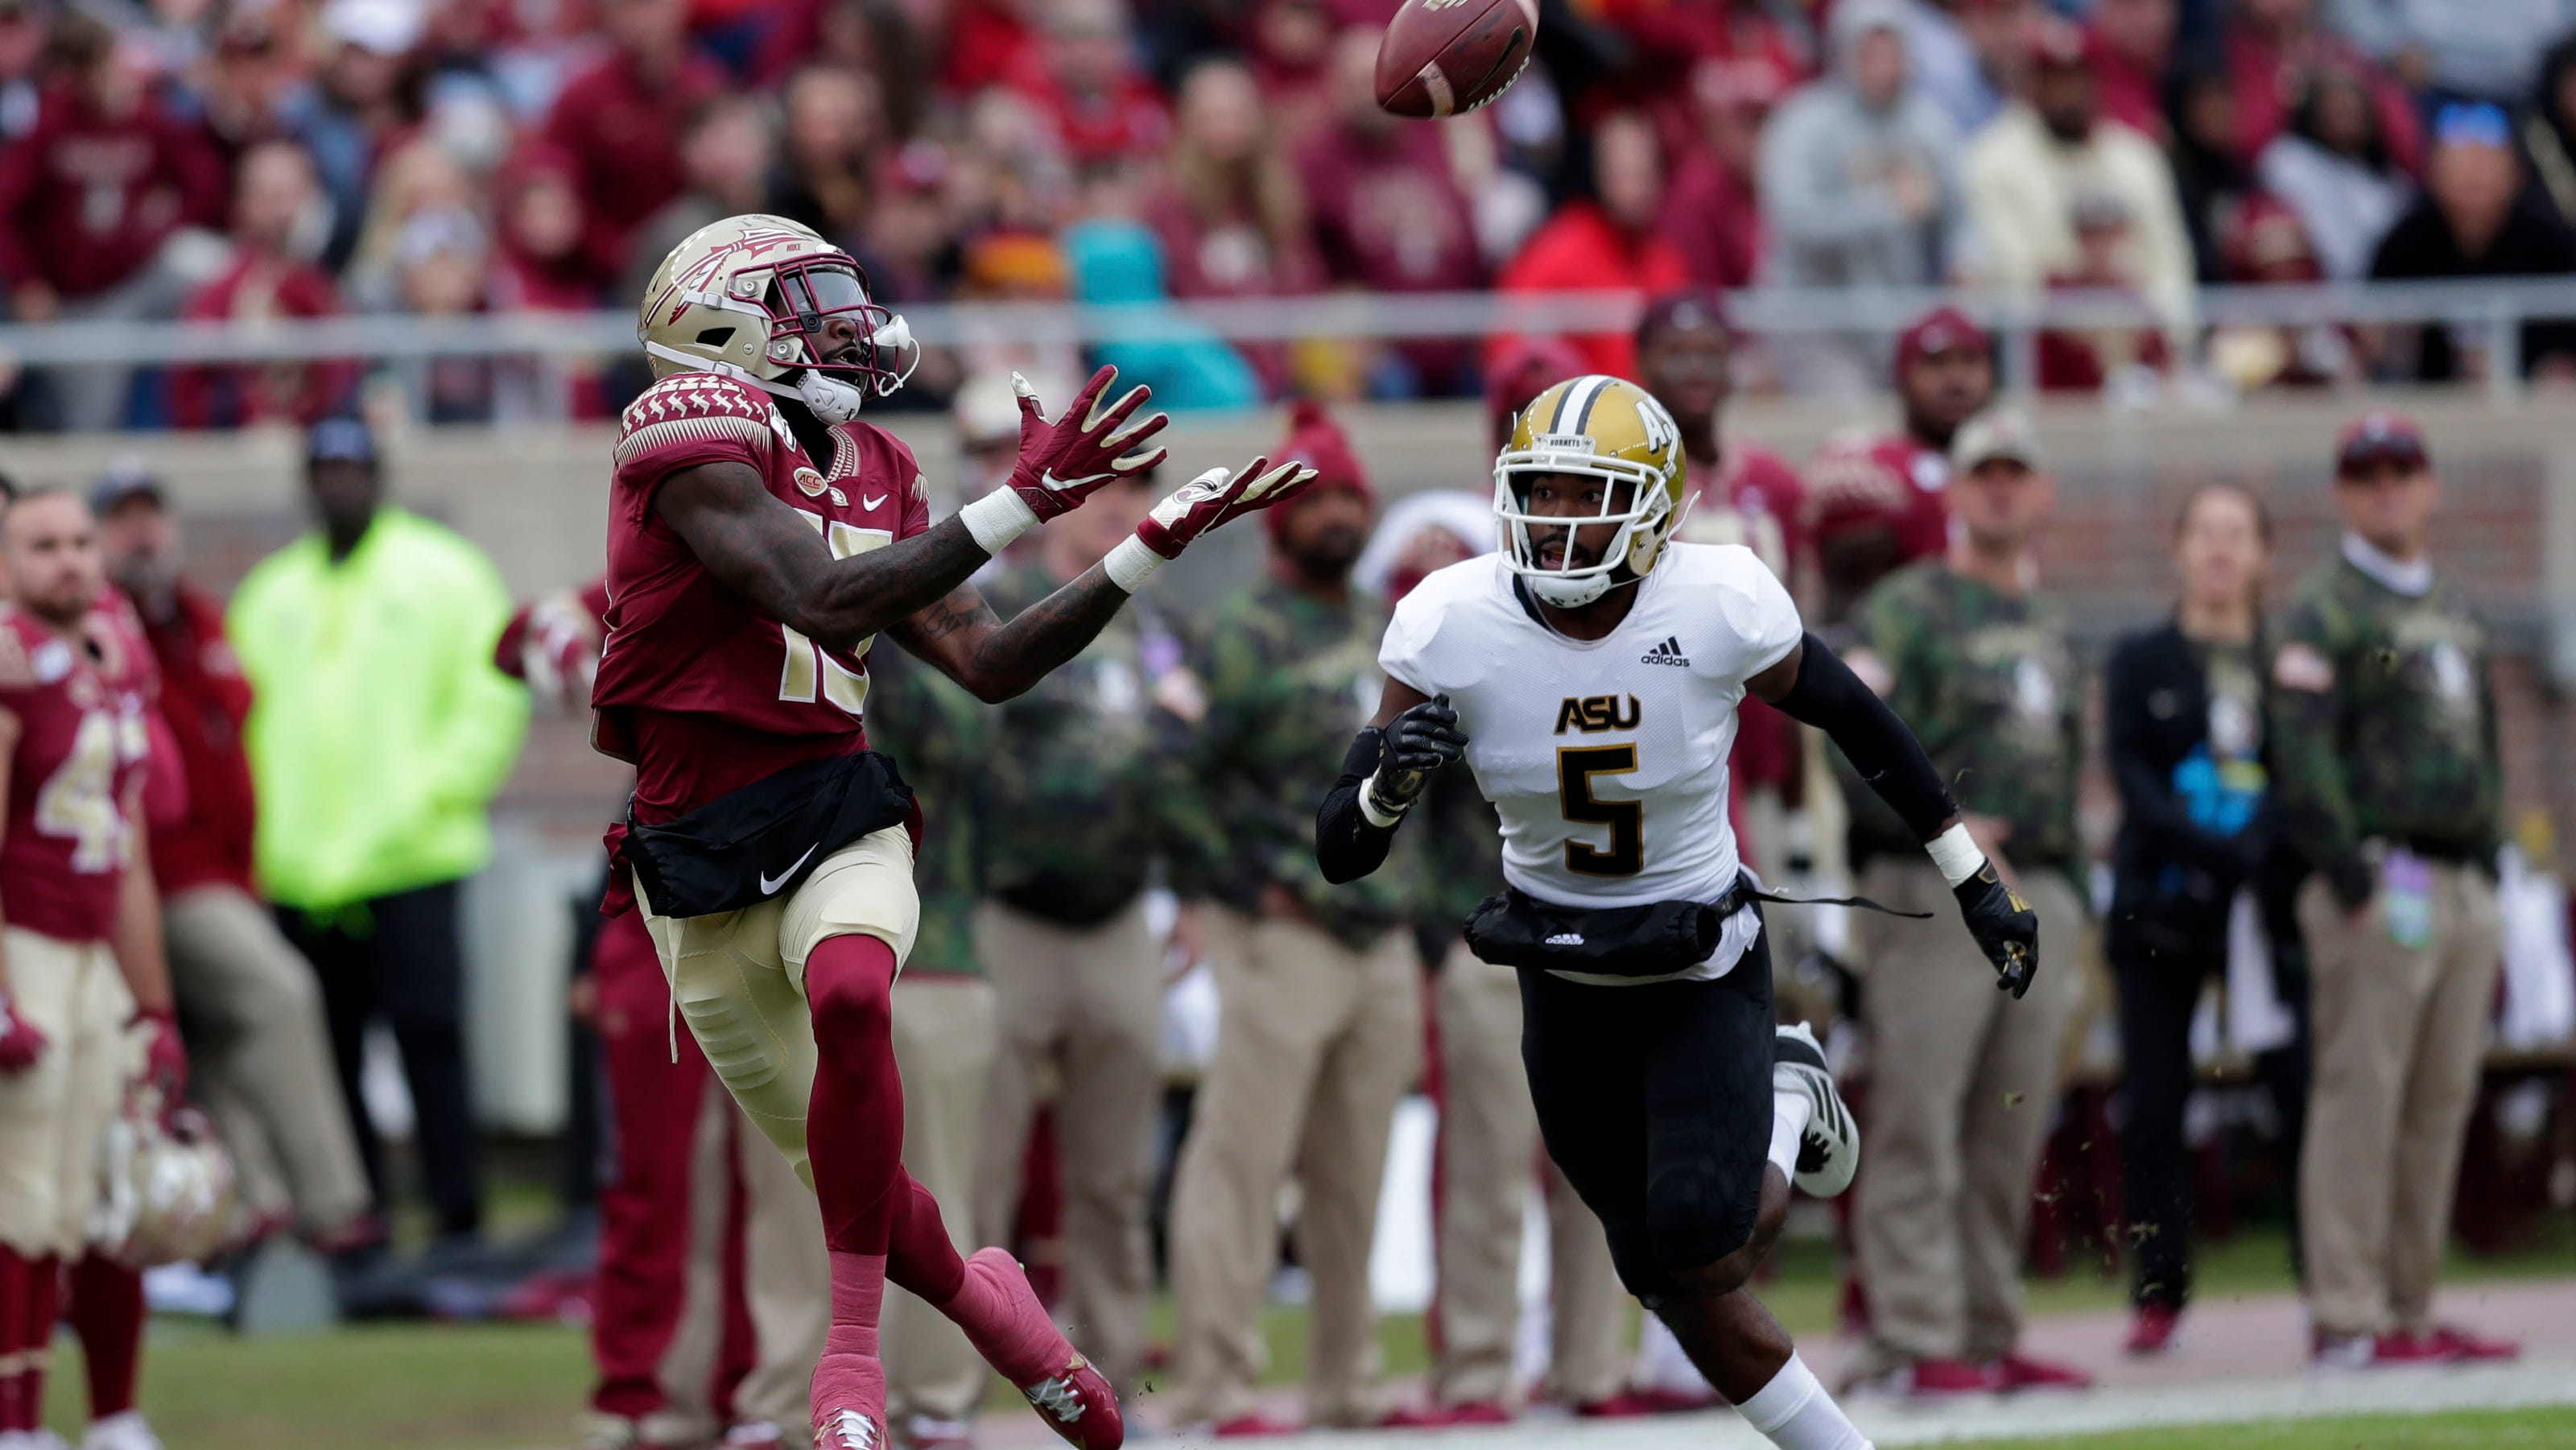 FSU looks to rebound against UM, 'show the world we are a good football